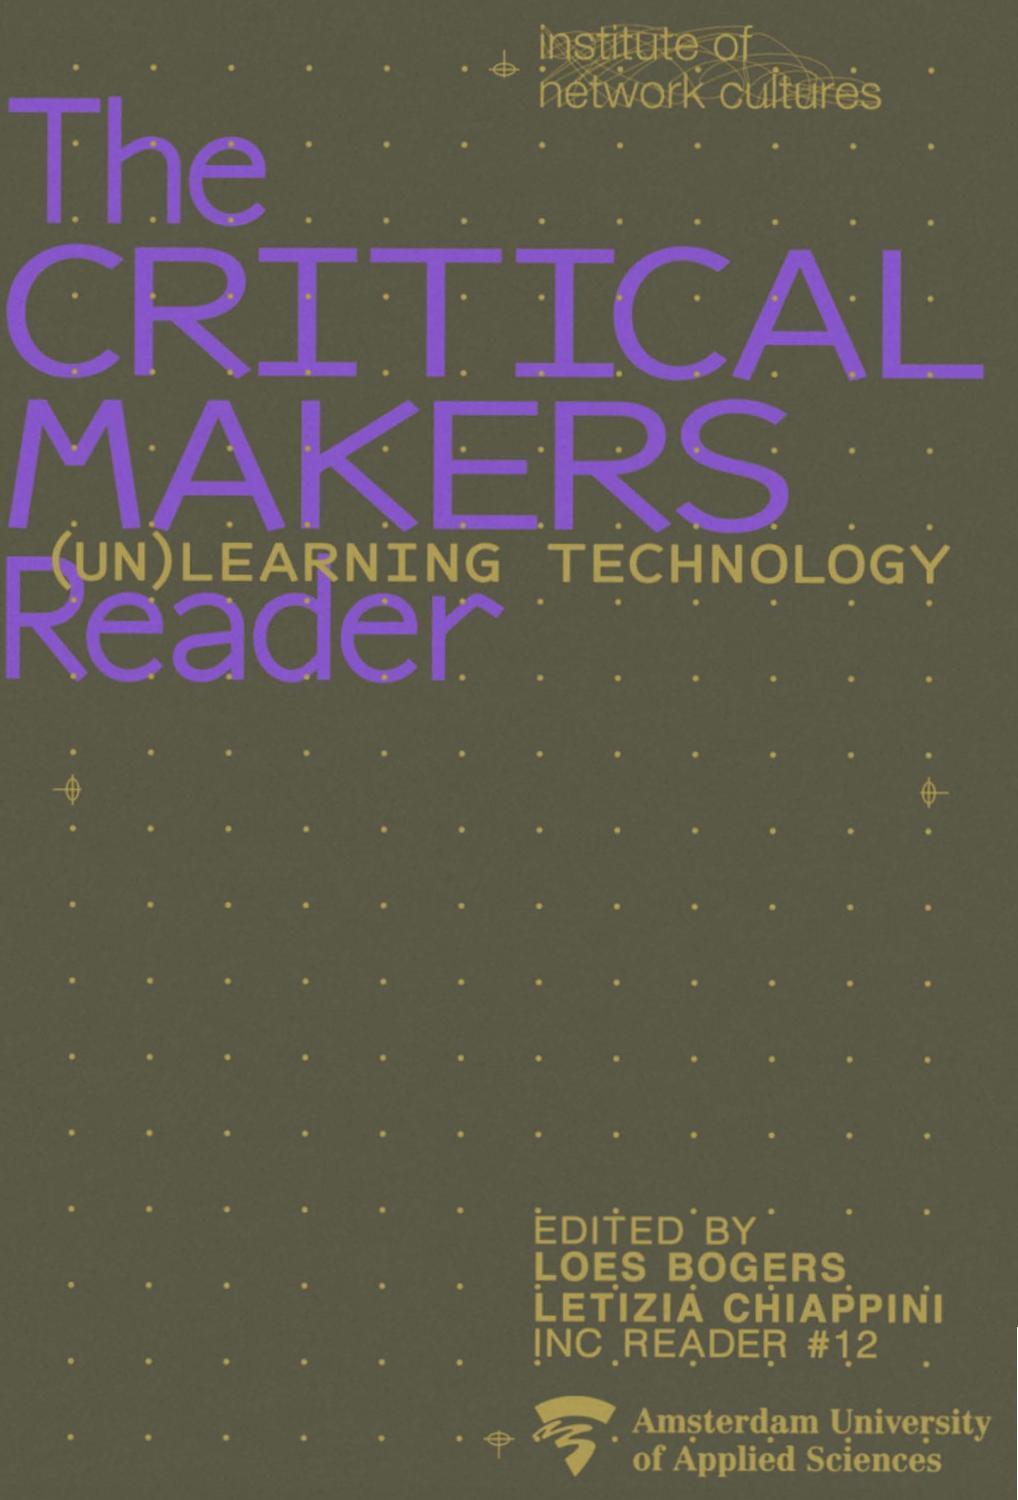 The Critical Makers Reader: (Un)learning Technology